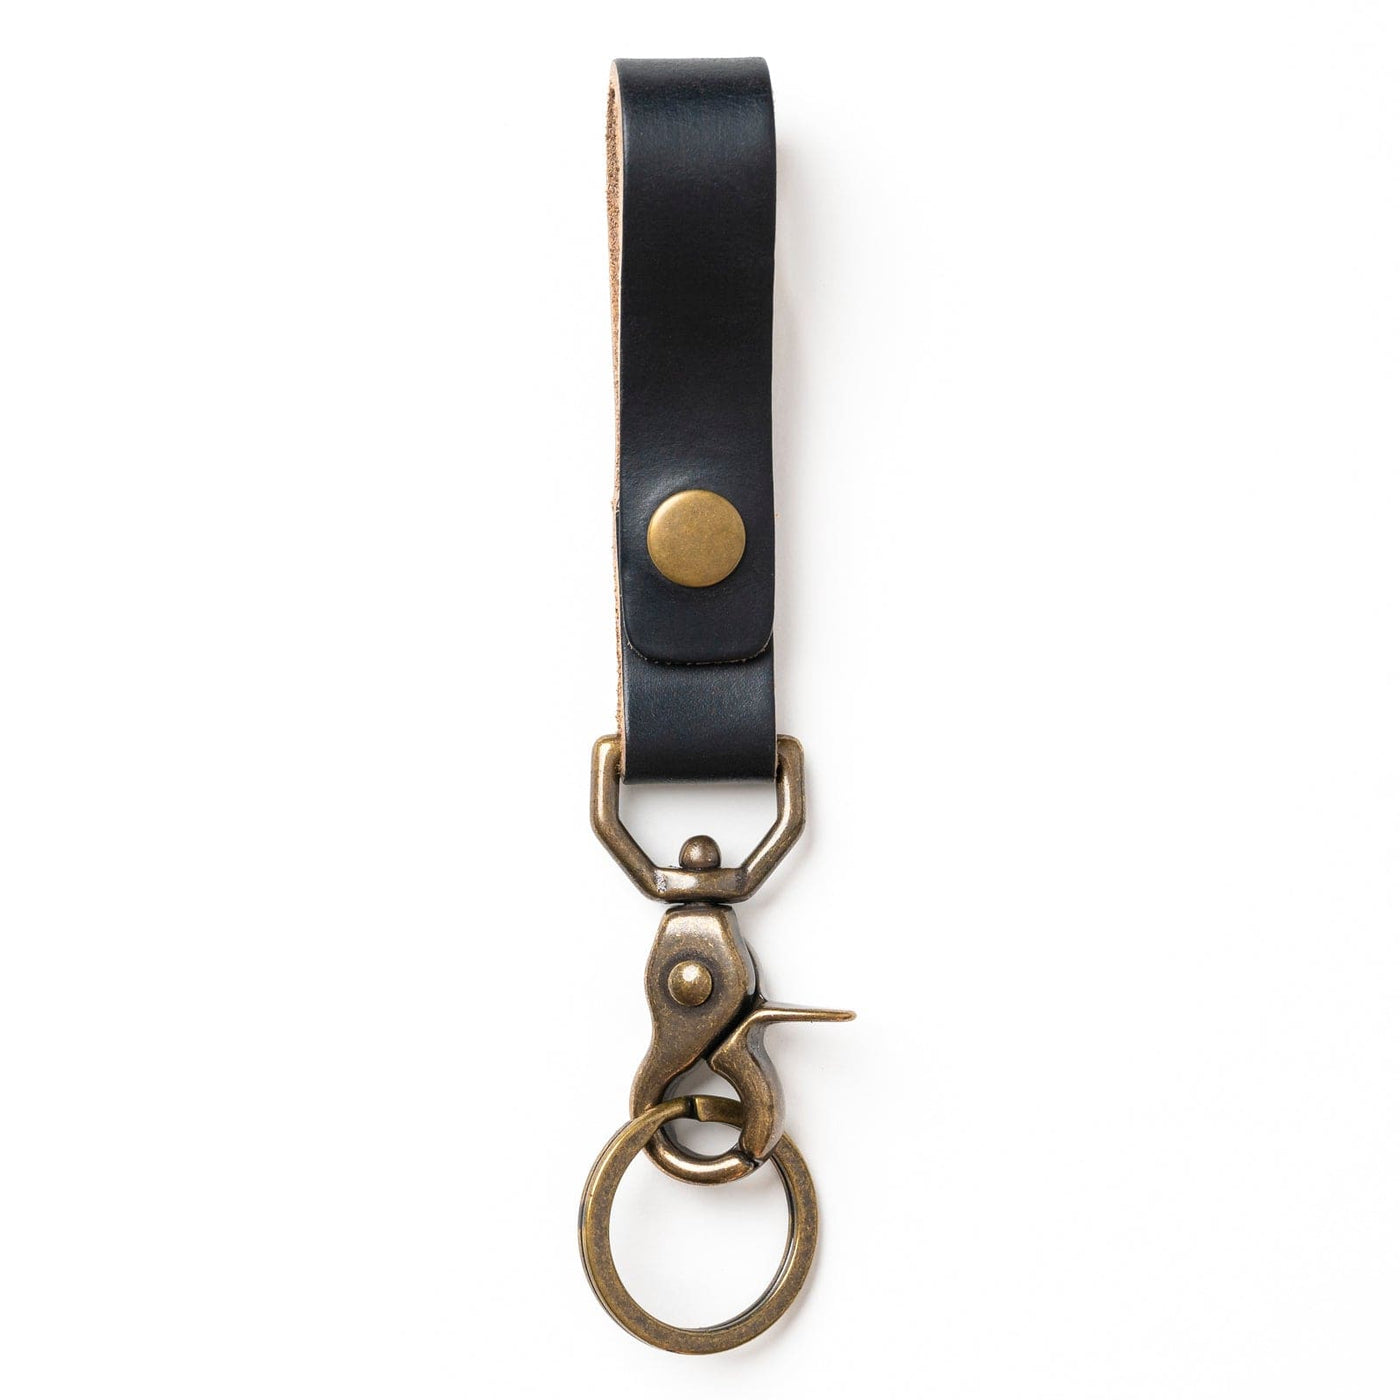 Shop for and Buy Leather Belt Loop Key Holder Heavy Duty - Double Snap at  Keyring.com. Large selection and bulk discounts available.